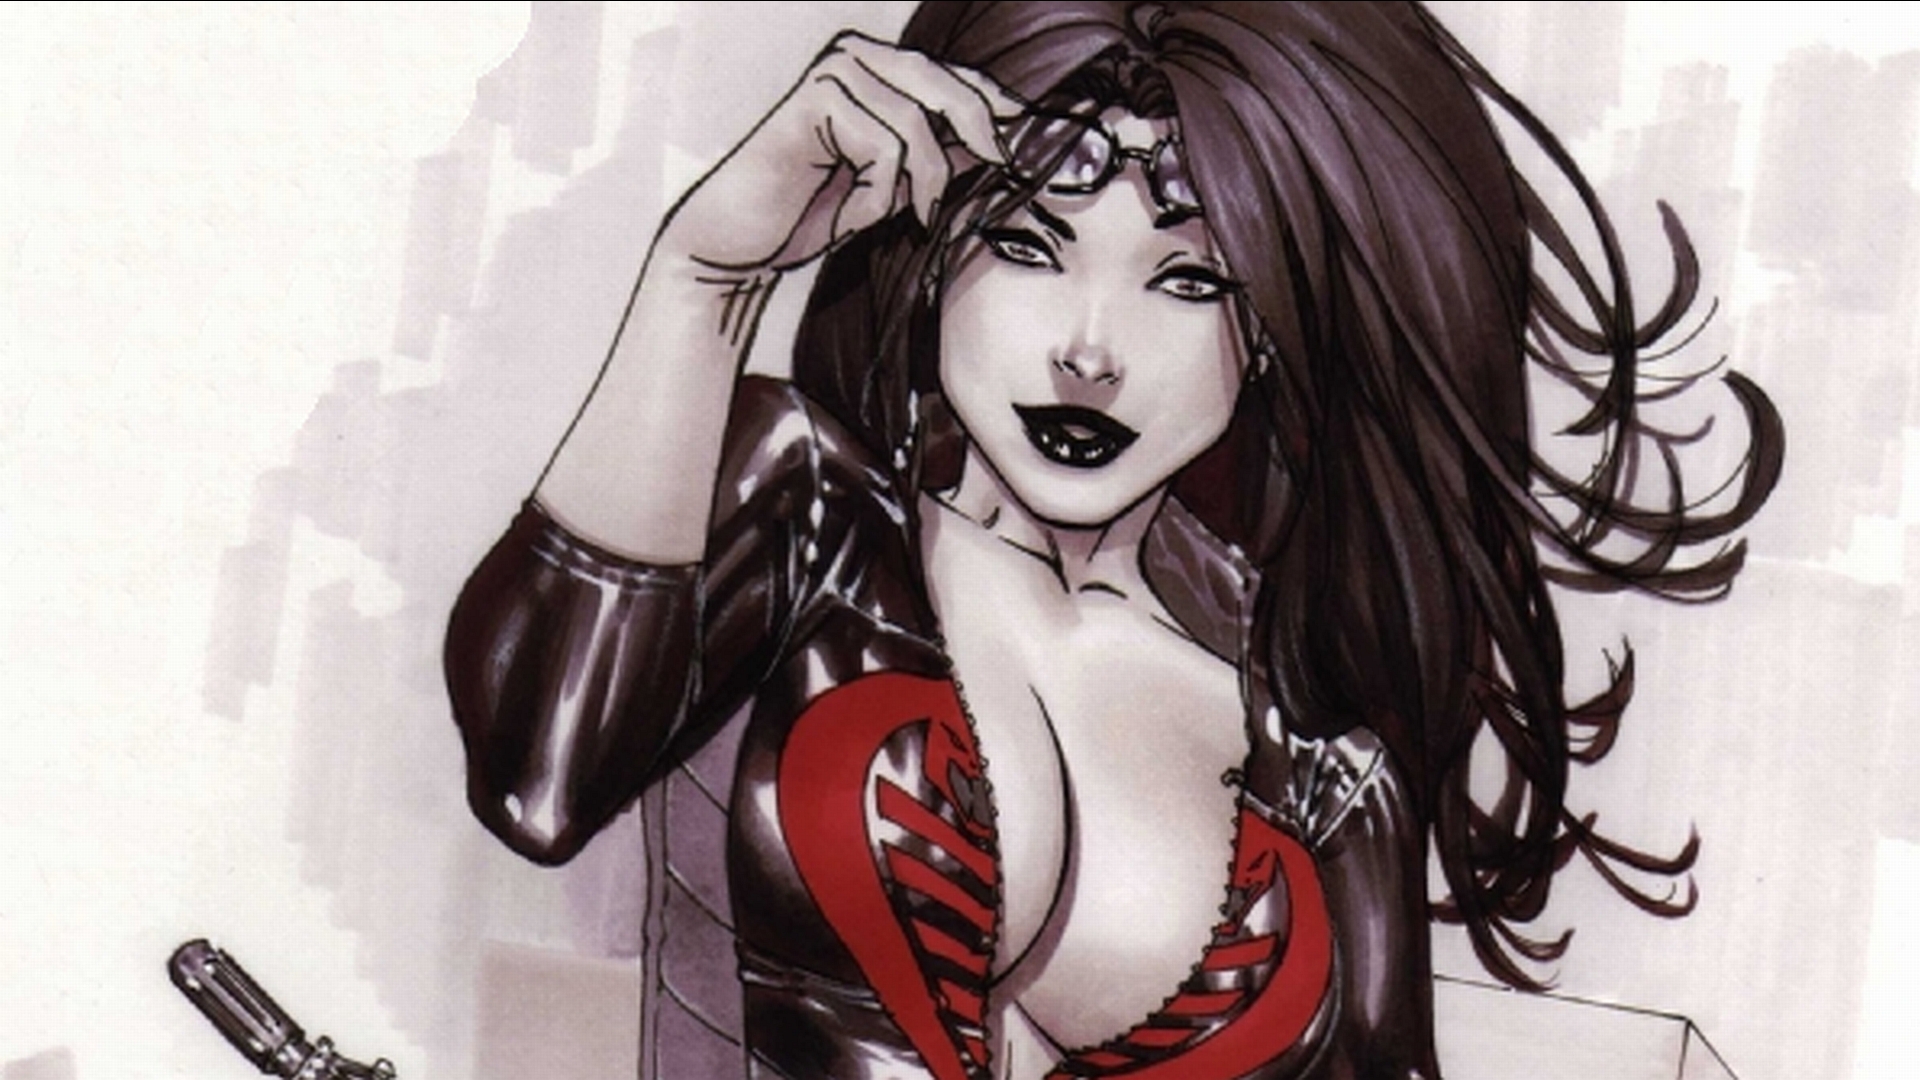 Comic book depiction of Baroness from G.I. Joe